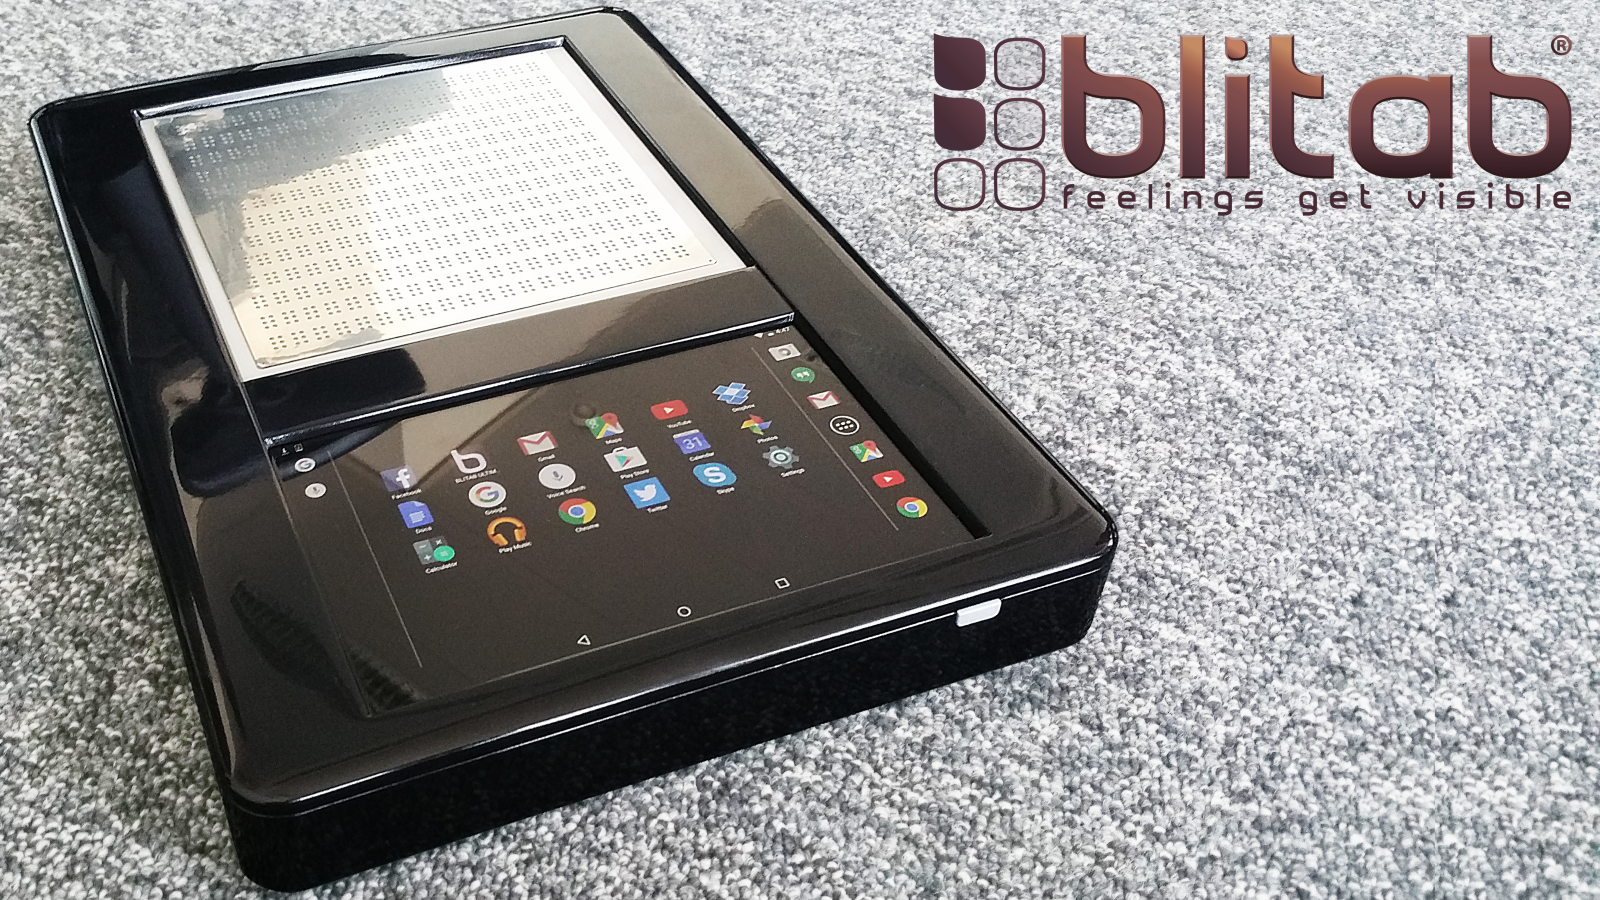 BLITAB® World’s first Tactile Tablet for Blind and Visually Impaired